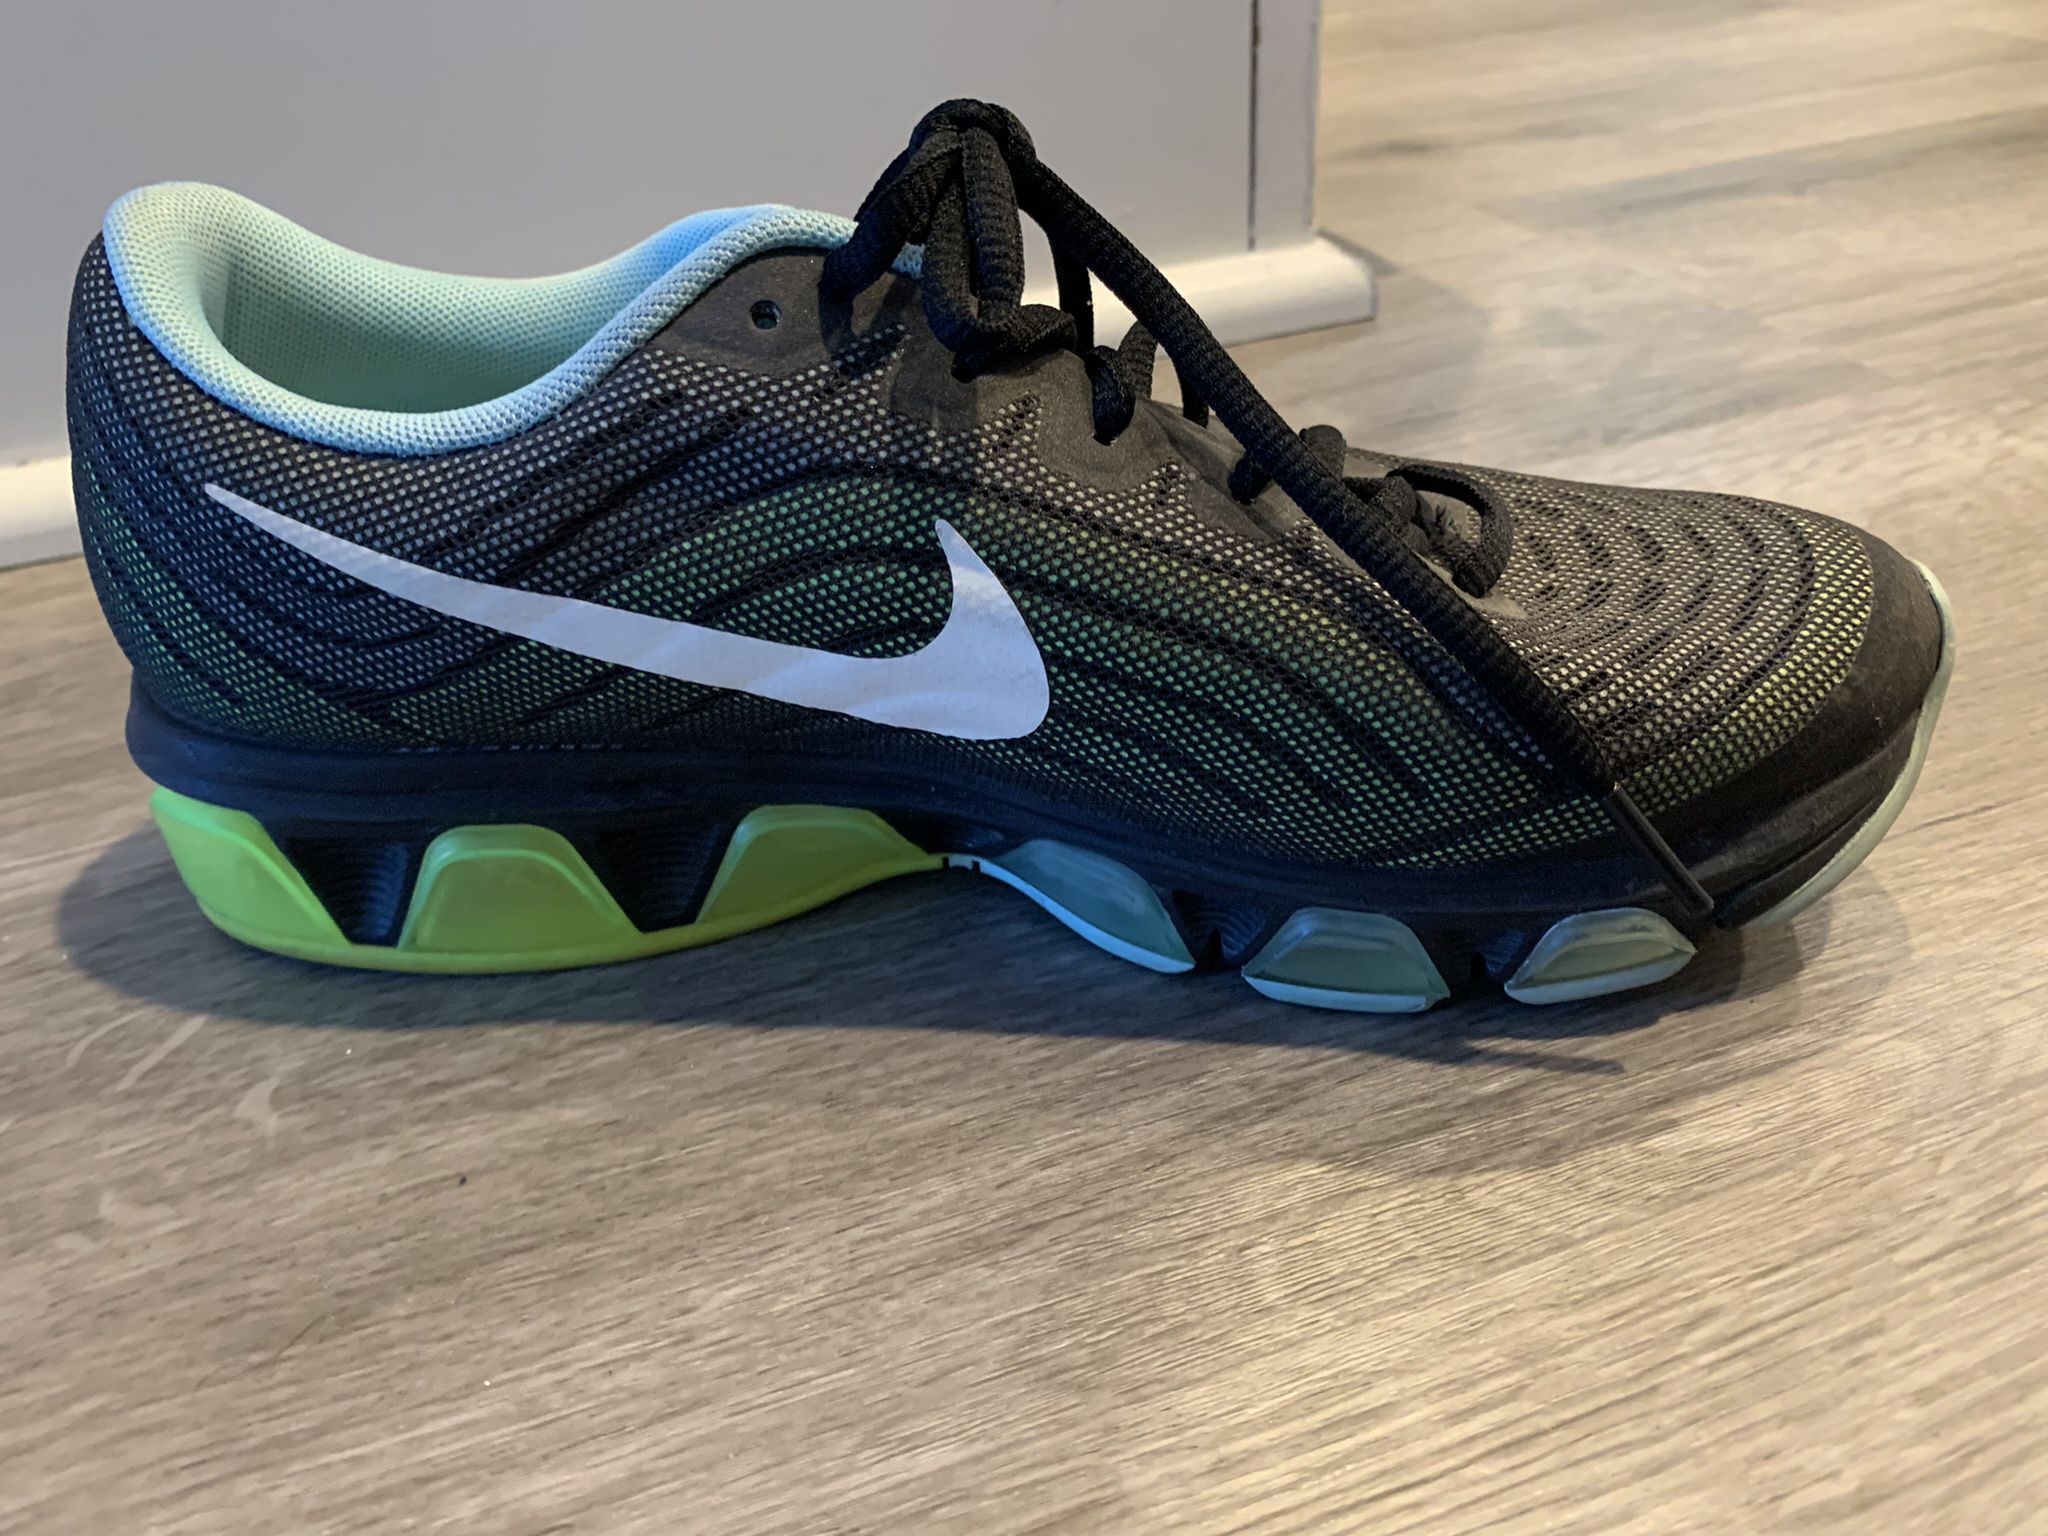 regional Indica Primer ministro Like New Nike Air Max Tailwind 2014 Womens 8 for Sale in Buena Park, CA -  OfferUp